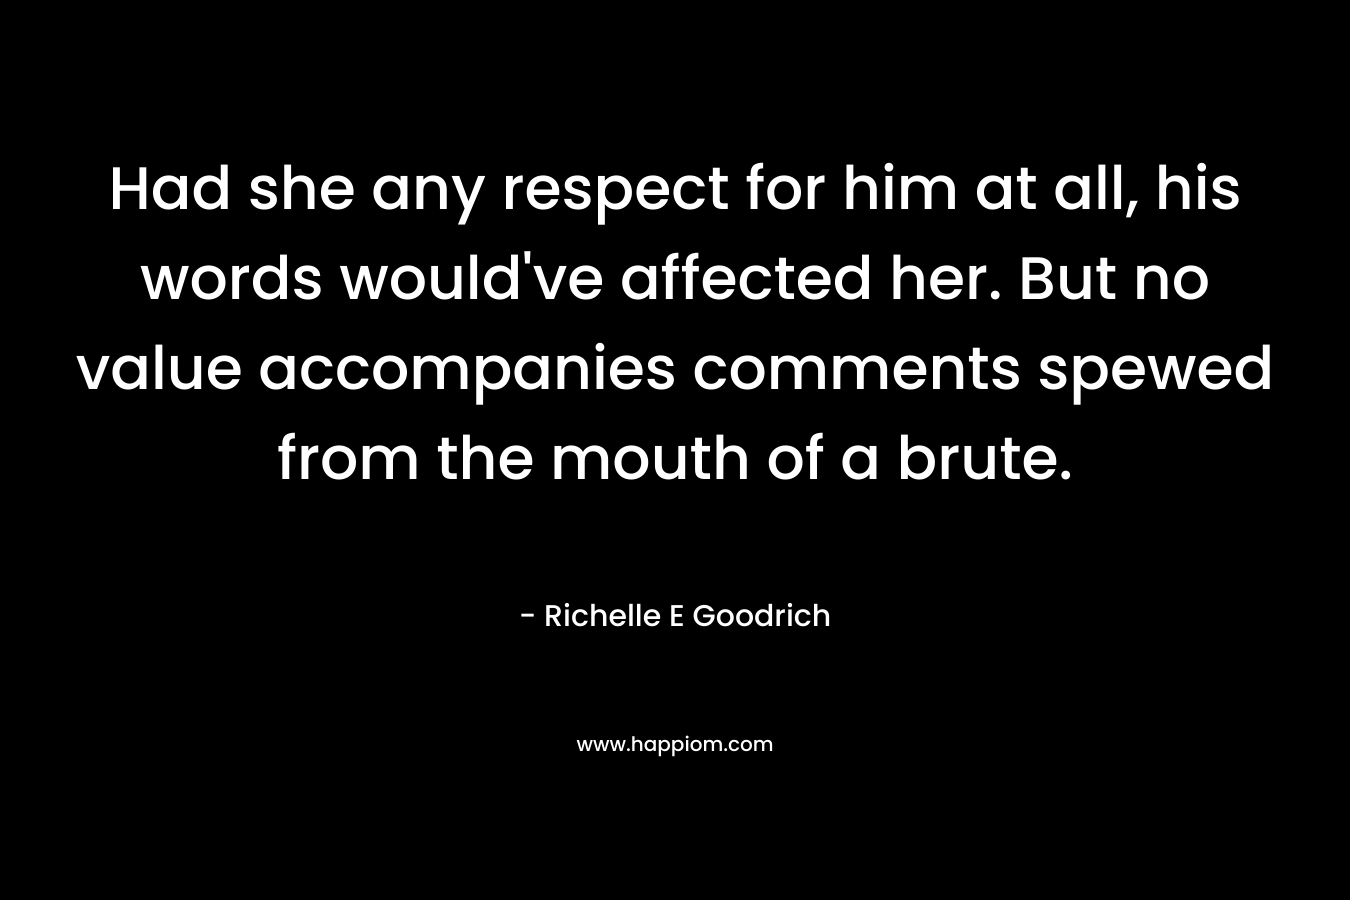 Had she any respect for him at all, his words would've affected her. But no value accompanies comments spewed from the mouth of a brute.